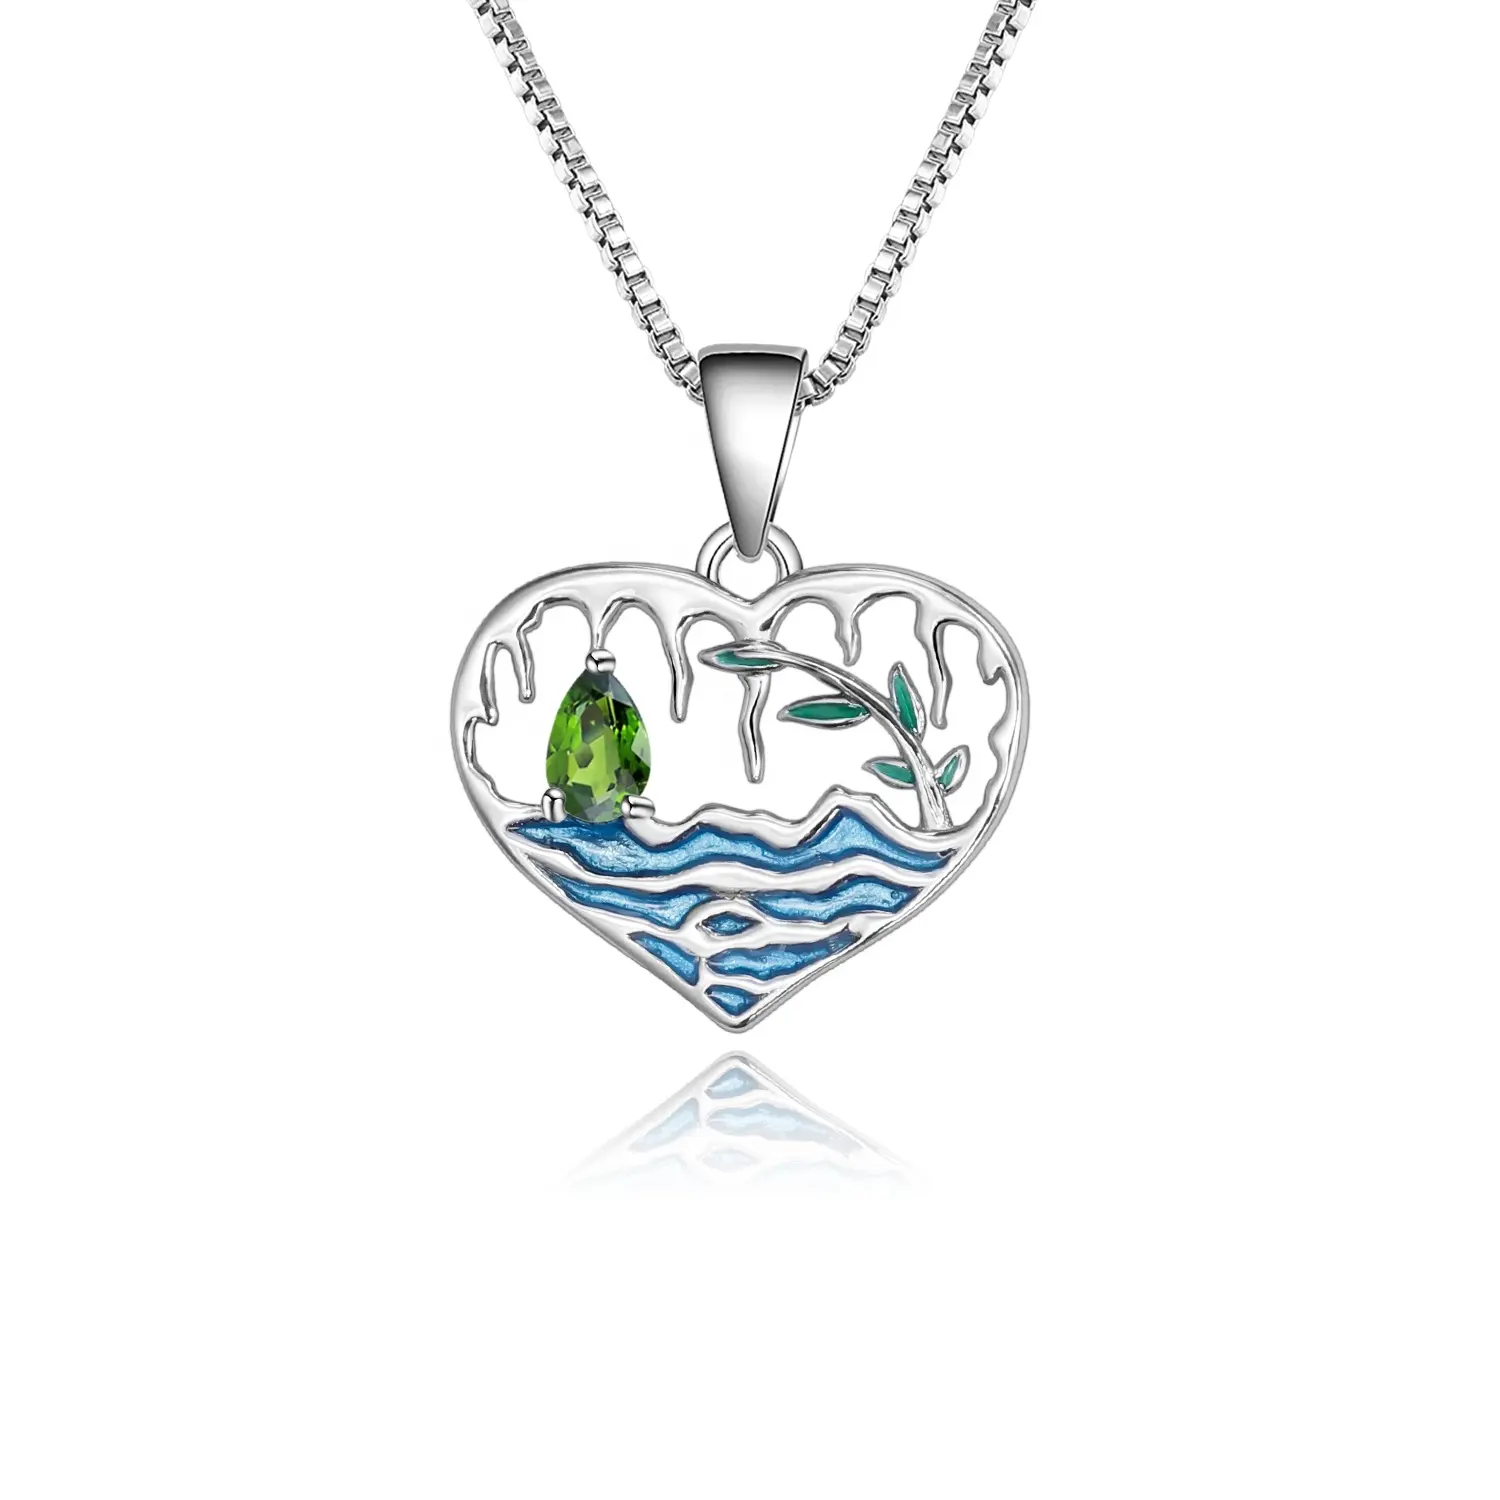 OEM ODM New Design Fashion 925 Sterling Silver Pendant Chrome Diopside Gemstone Sea and Tree Paint Heart Shape Pendant